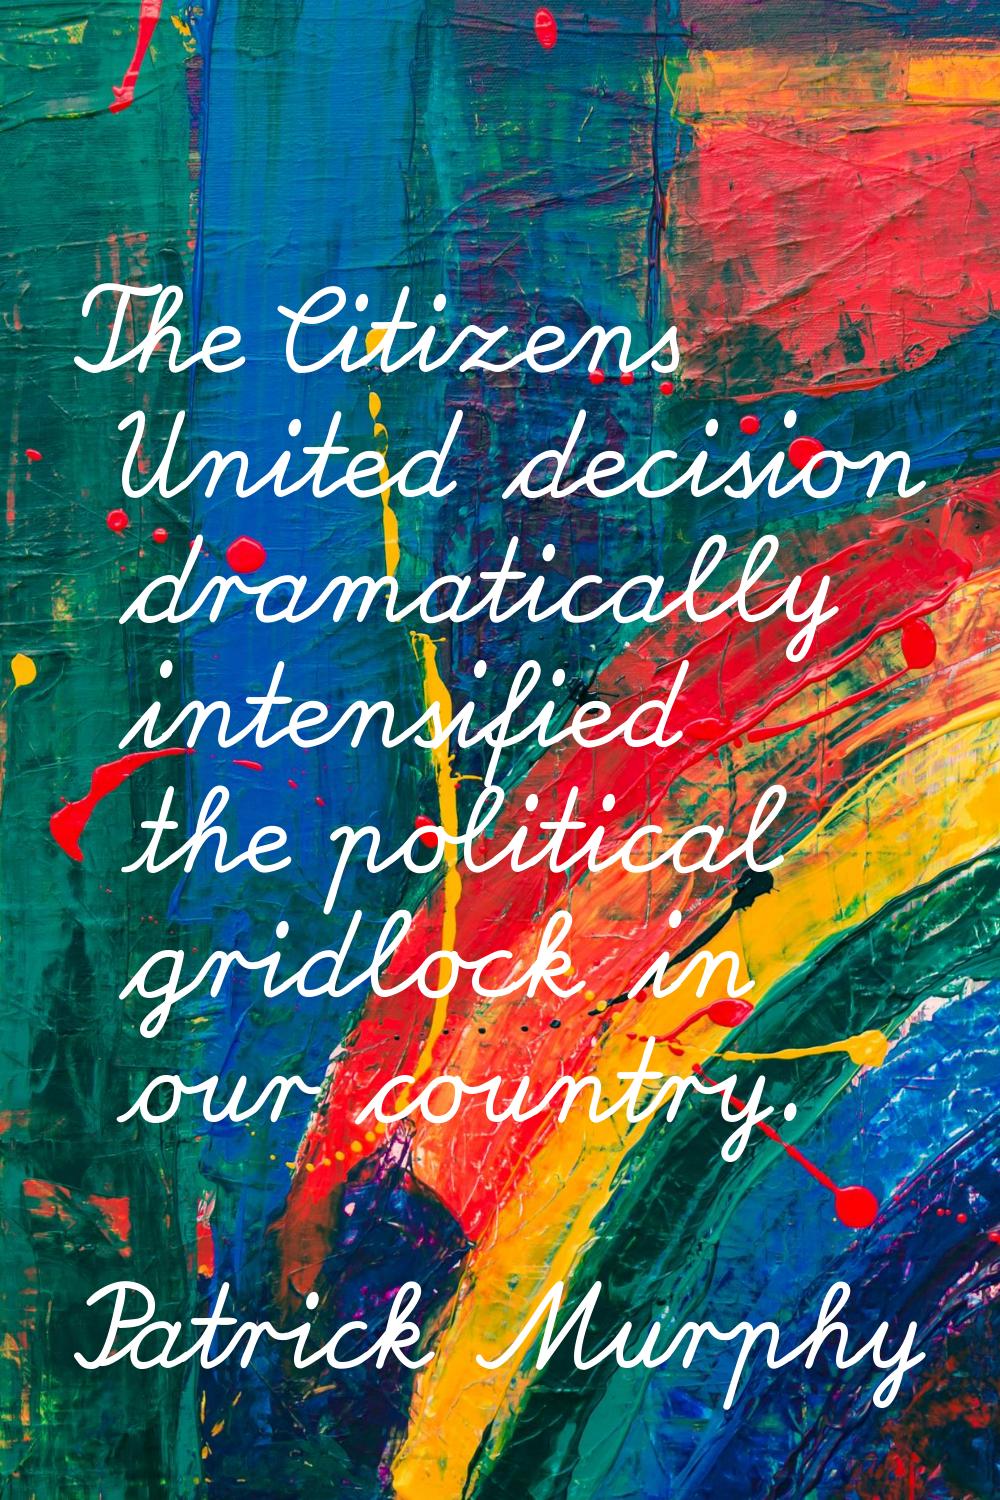 The Citizens United decision dramatically intensified the political gridlock in our country.